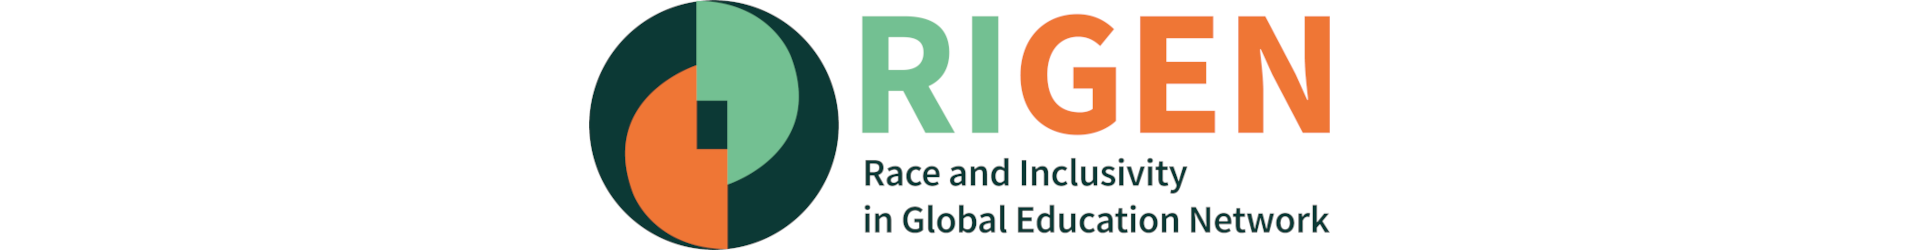 Introducing the Race and Inclusivity in Global Education Network (RIGEN) Blog Series